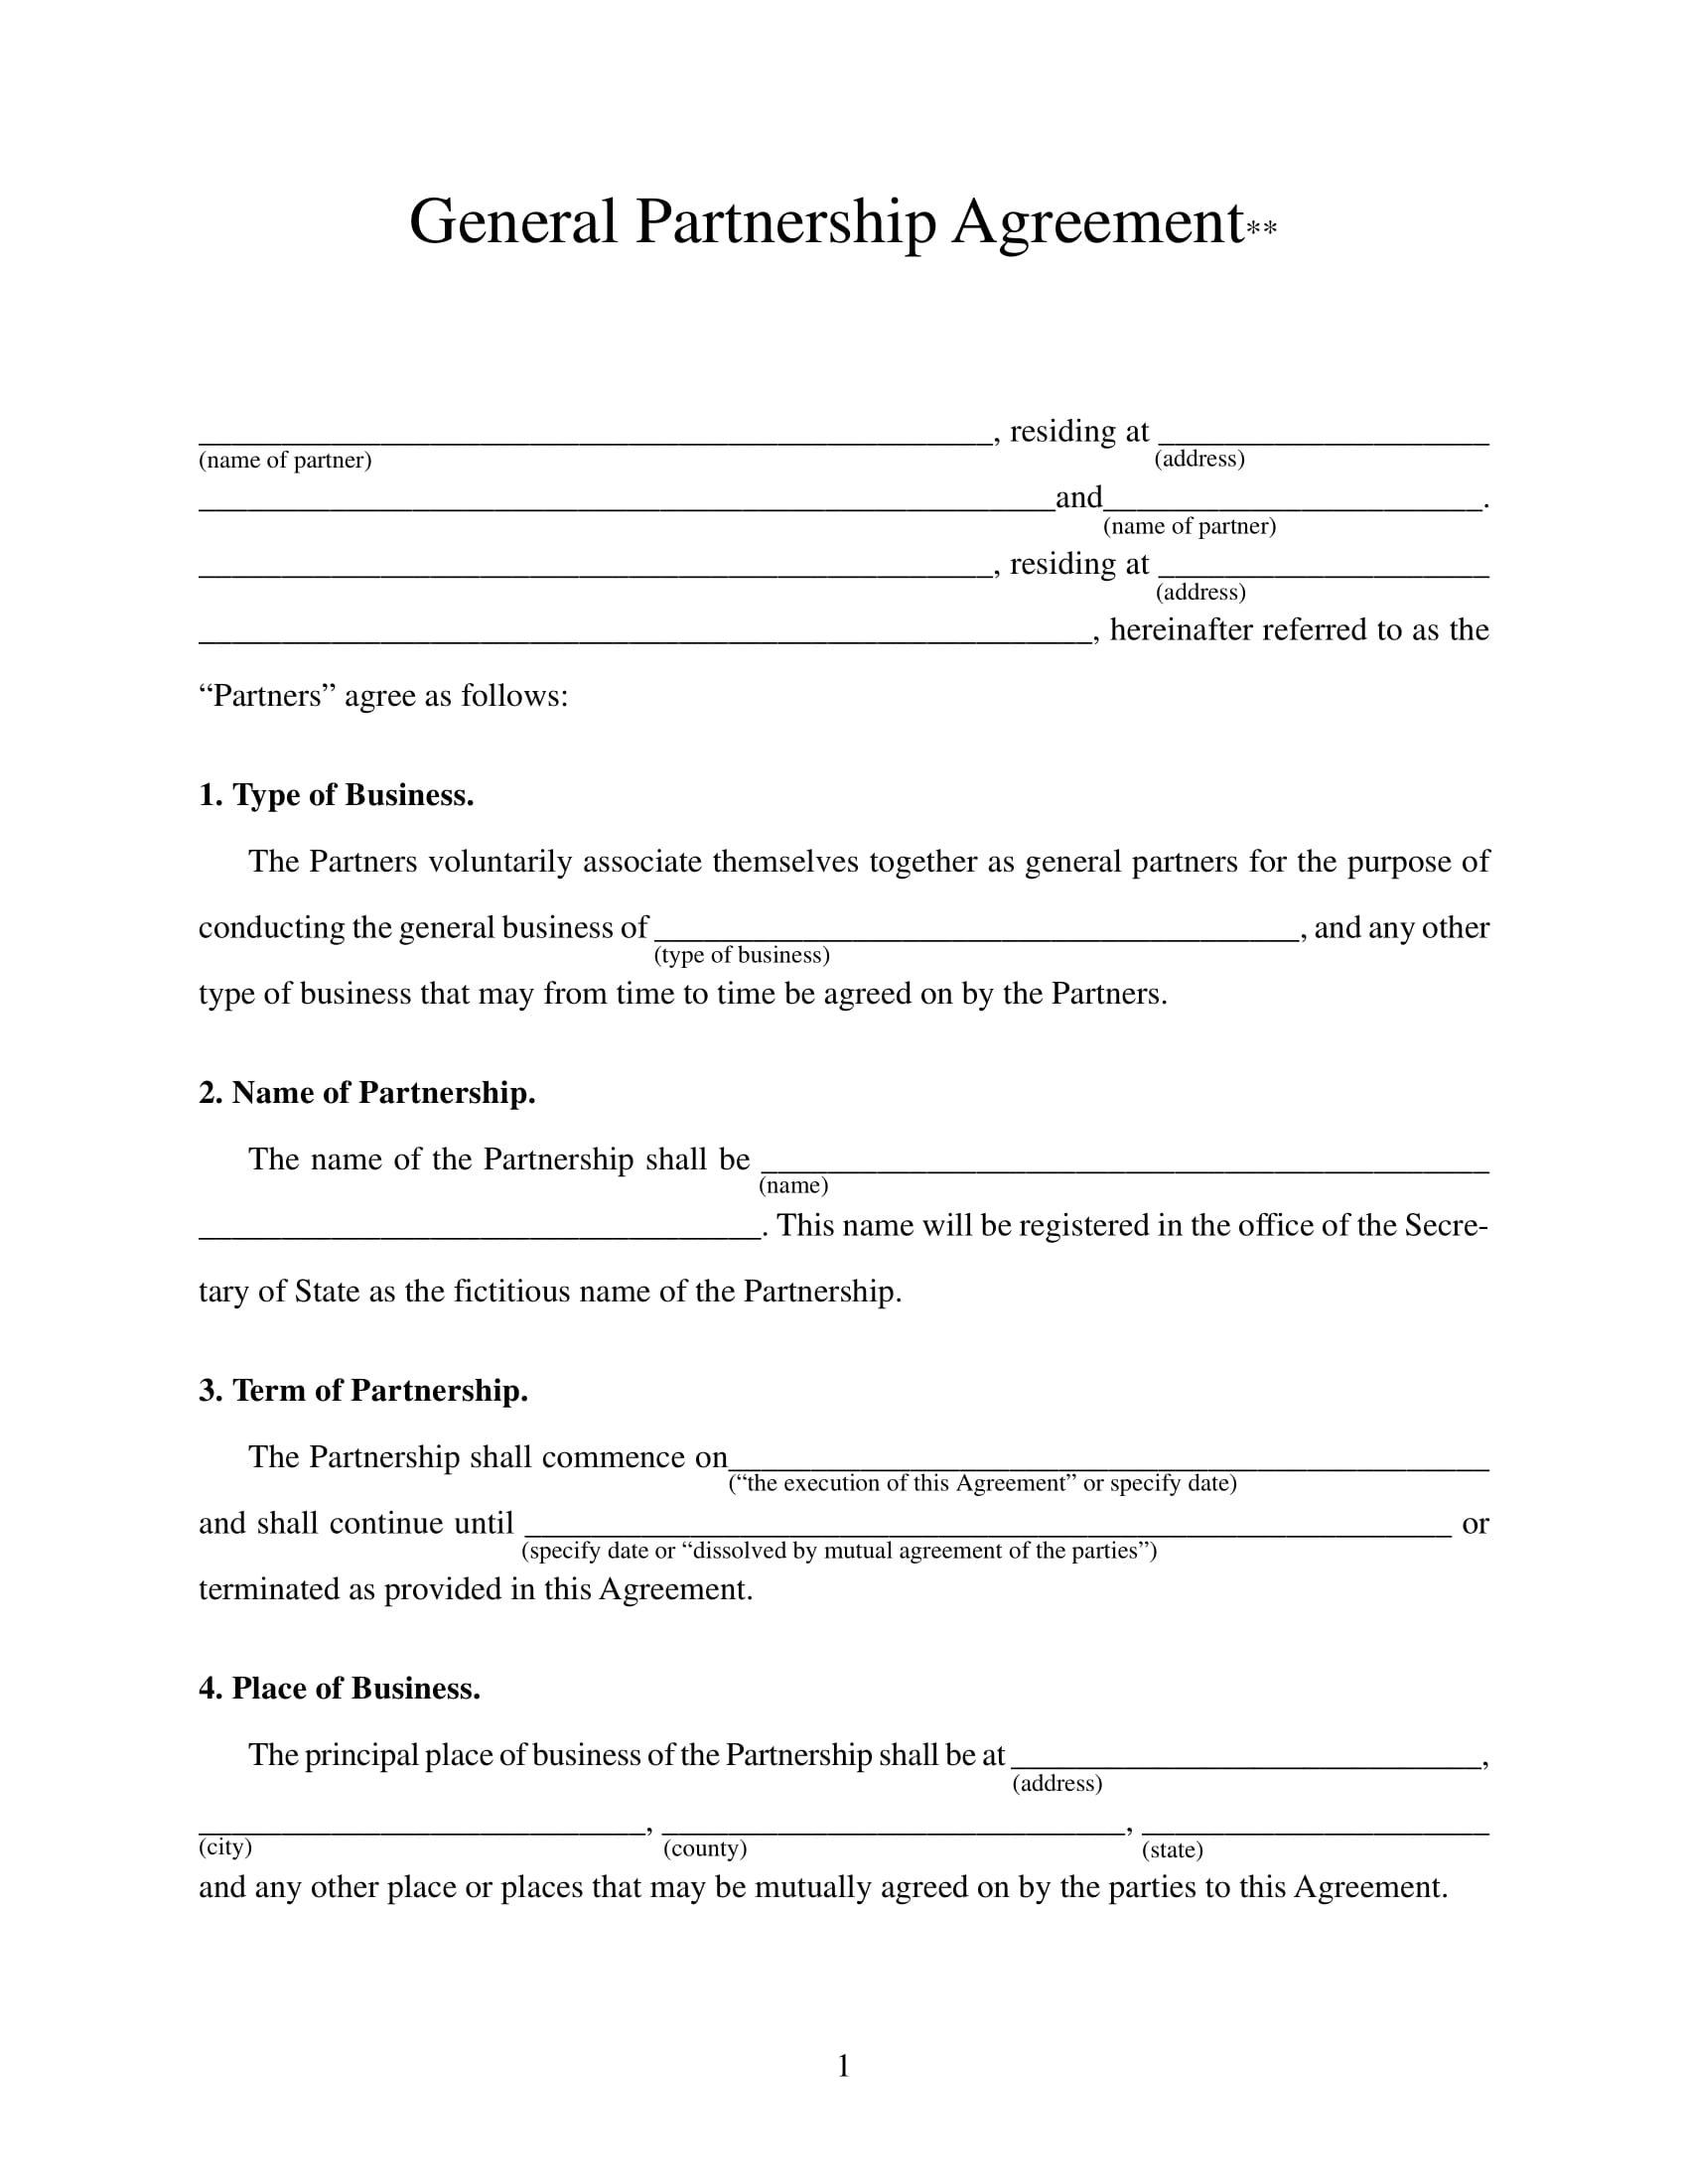 23+ 23/23 Partnership Agreement Templates Examples - PDF, DOC For heads of terms agreement template